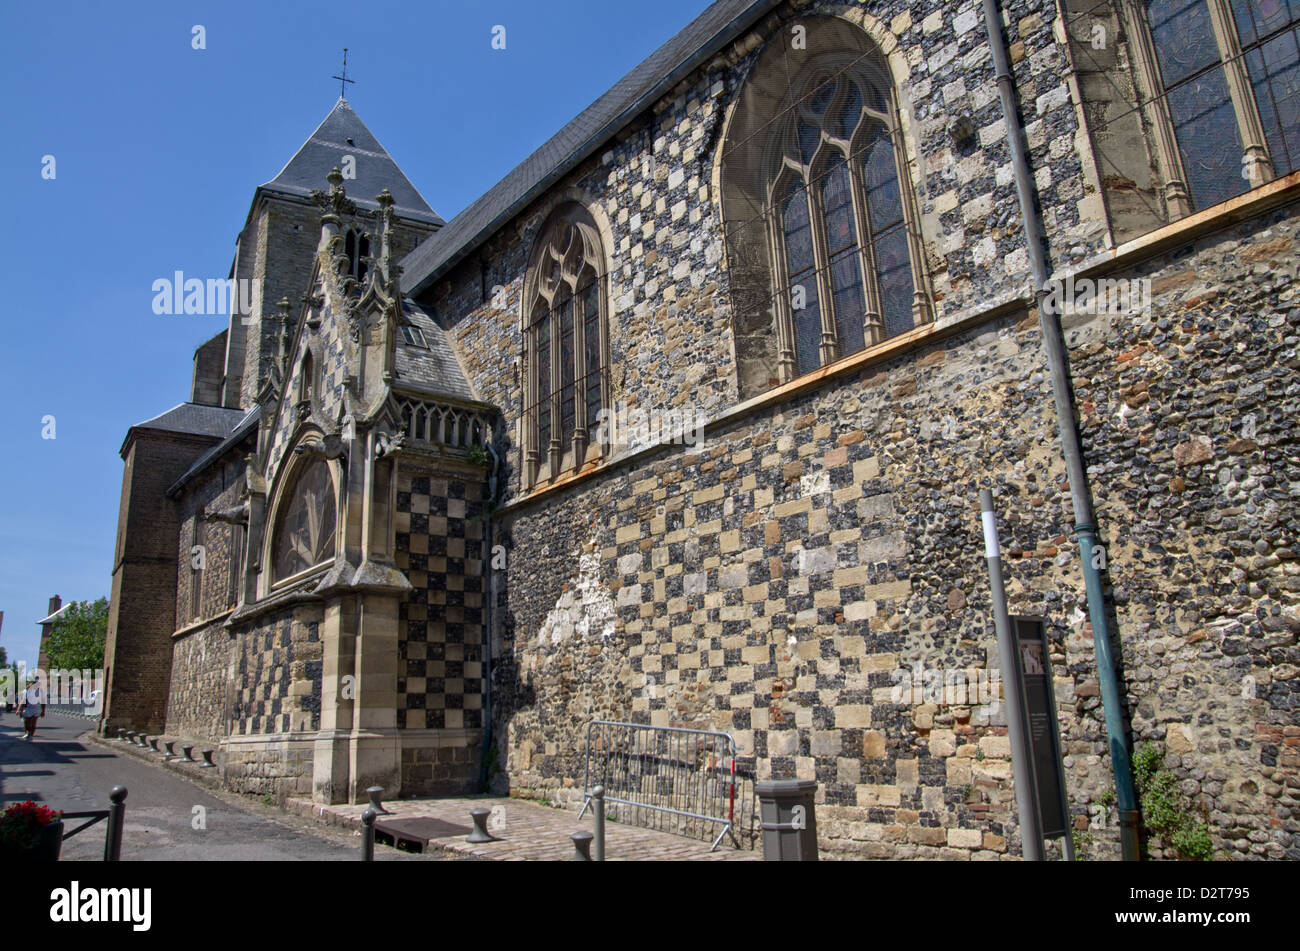 St Valery sur Somme, St Martins chiesa Foto Stock